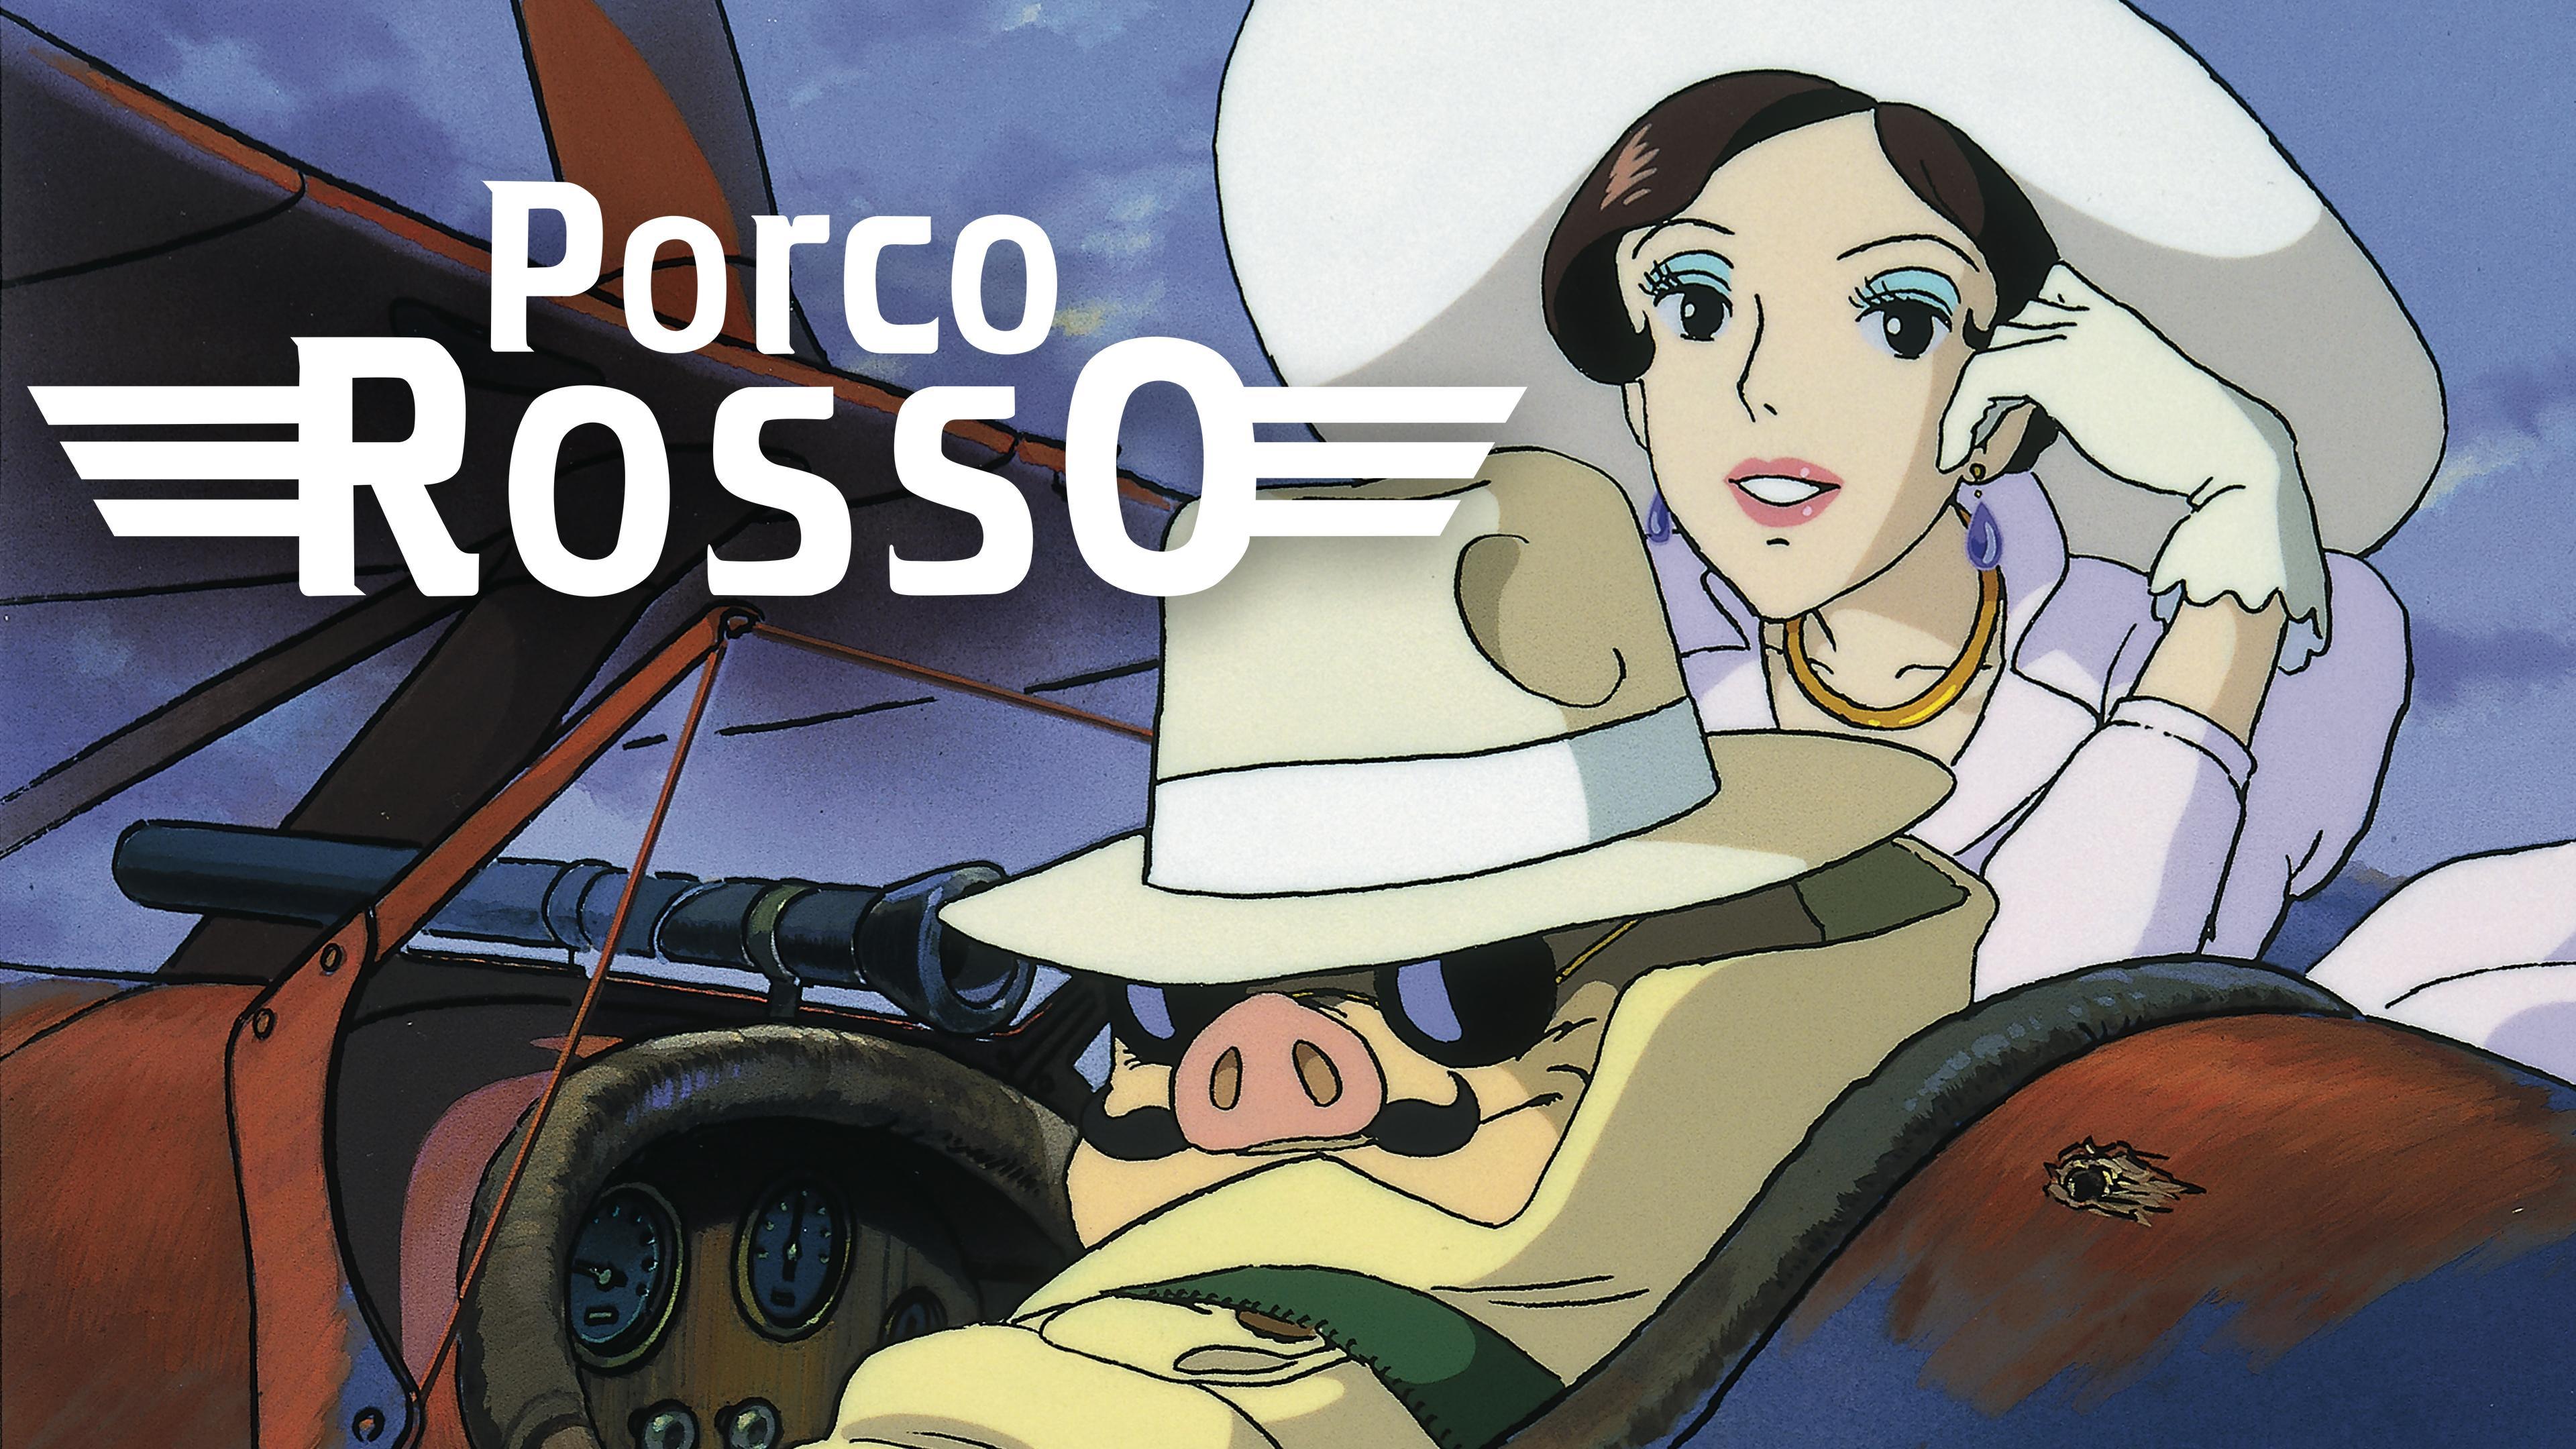 49-facts-about-the-movie-porco-rosso